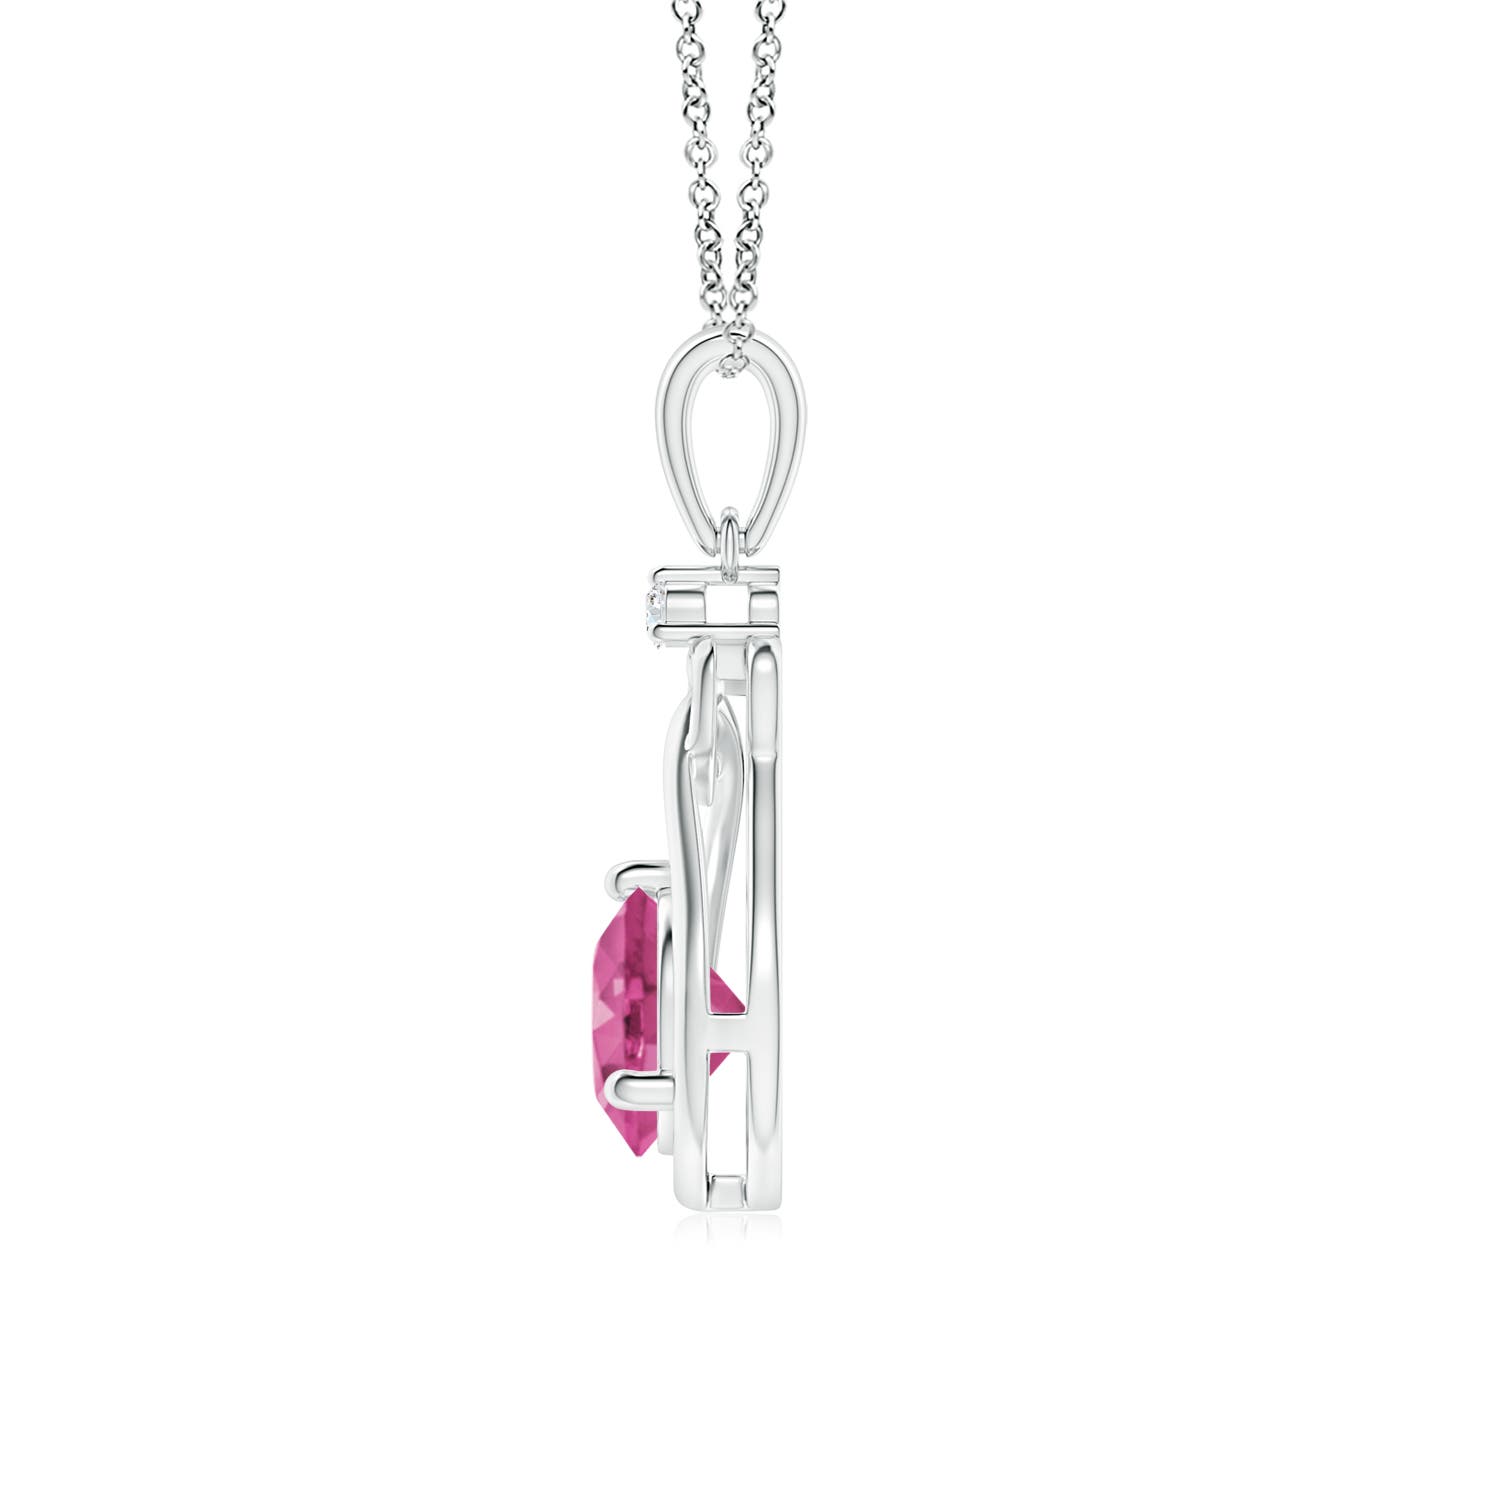 AAAA - Pink Sapphire / 1.01 CT / 14 KT White Gold